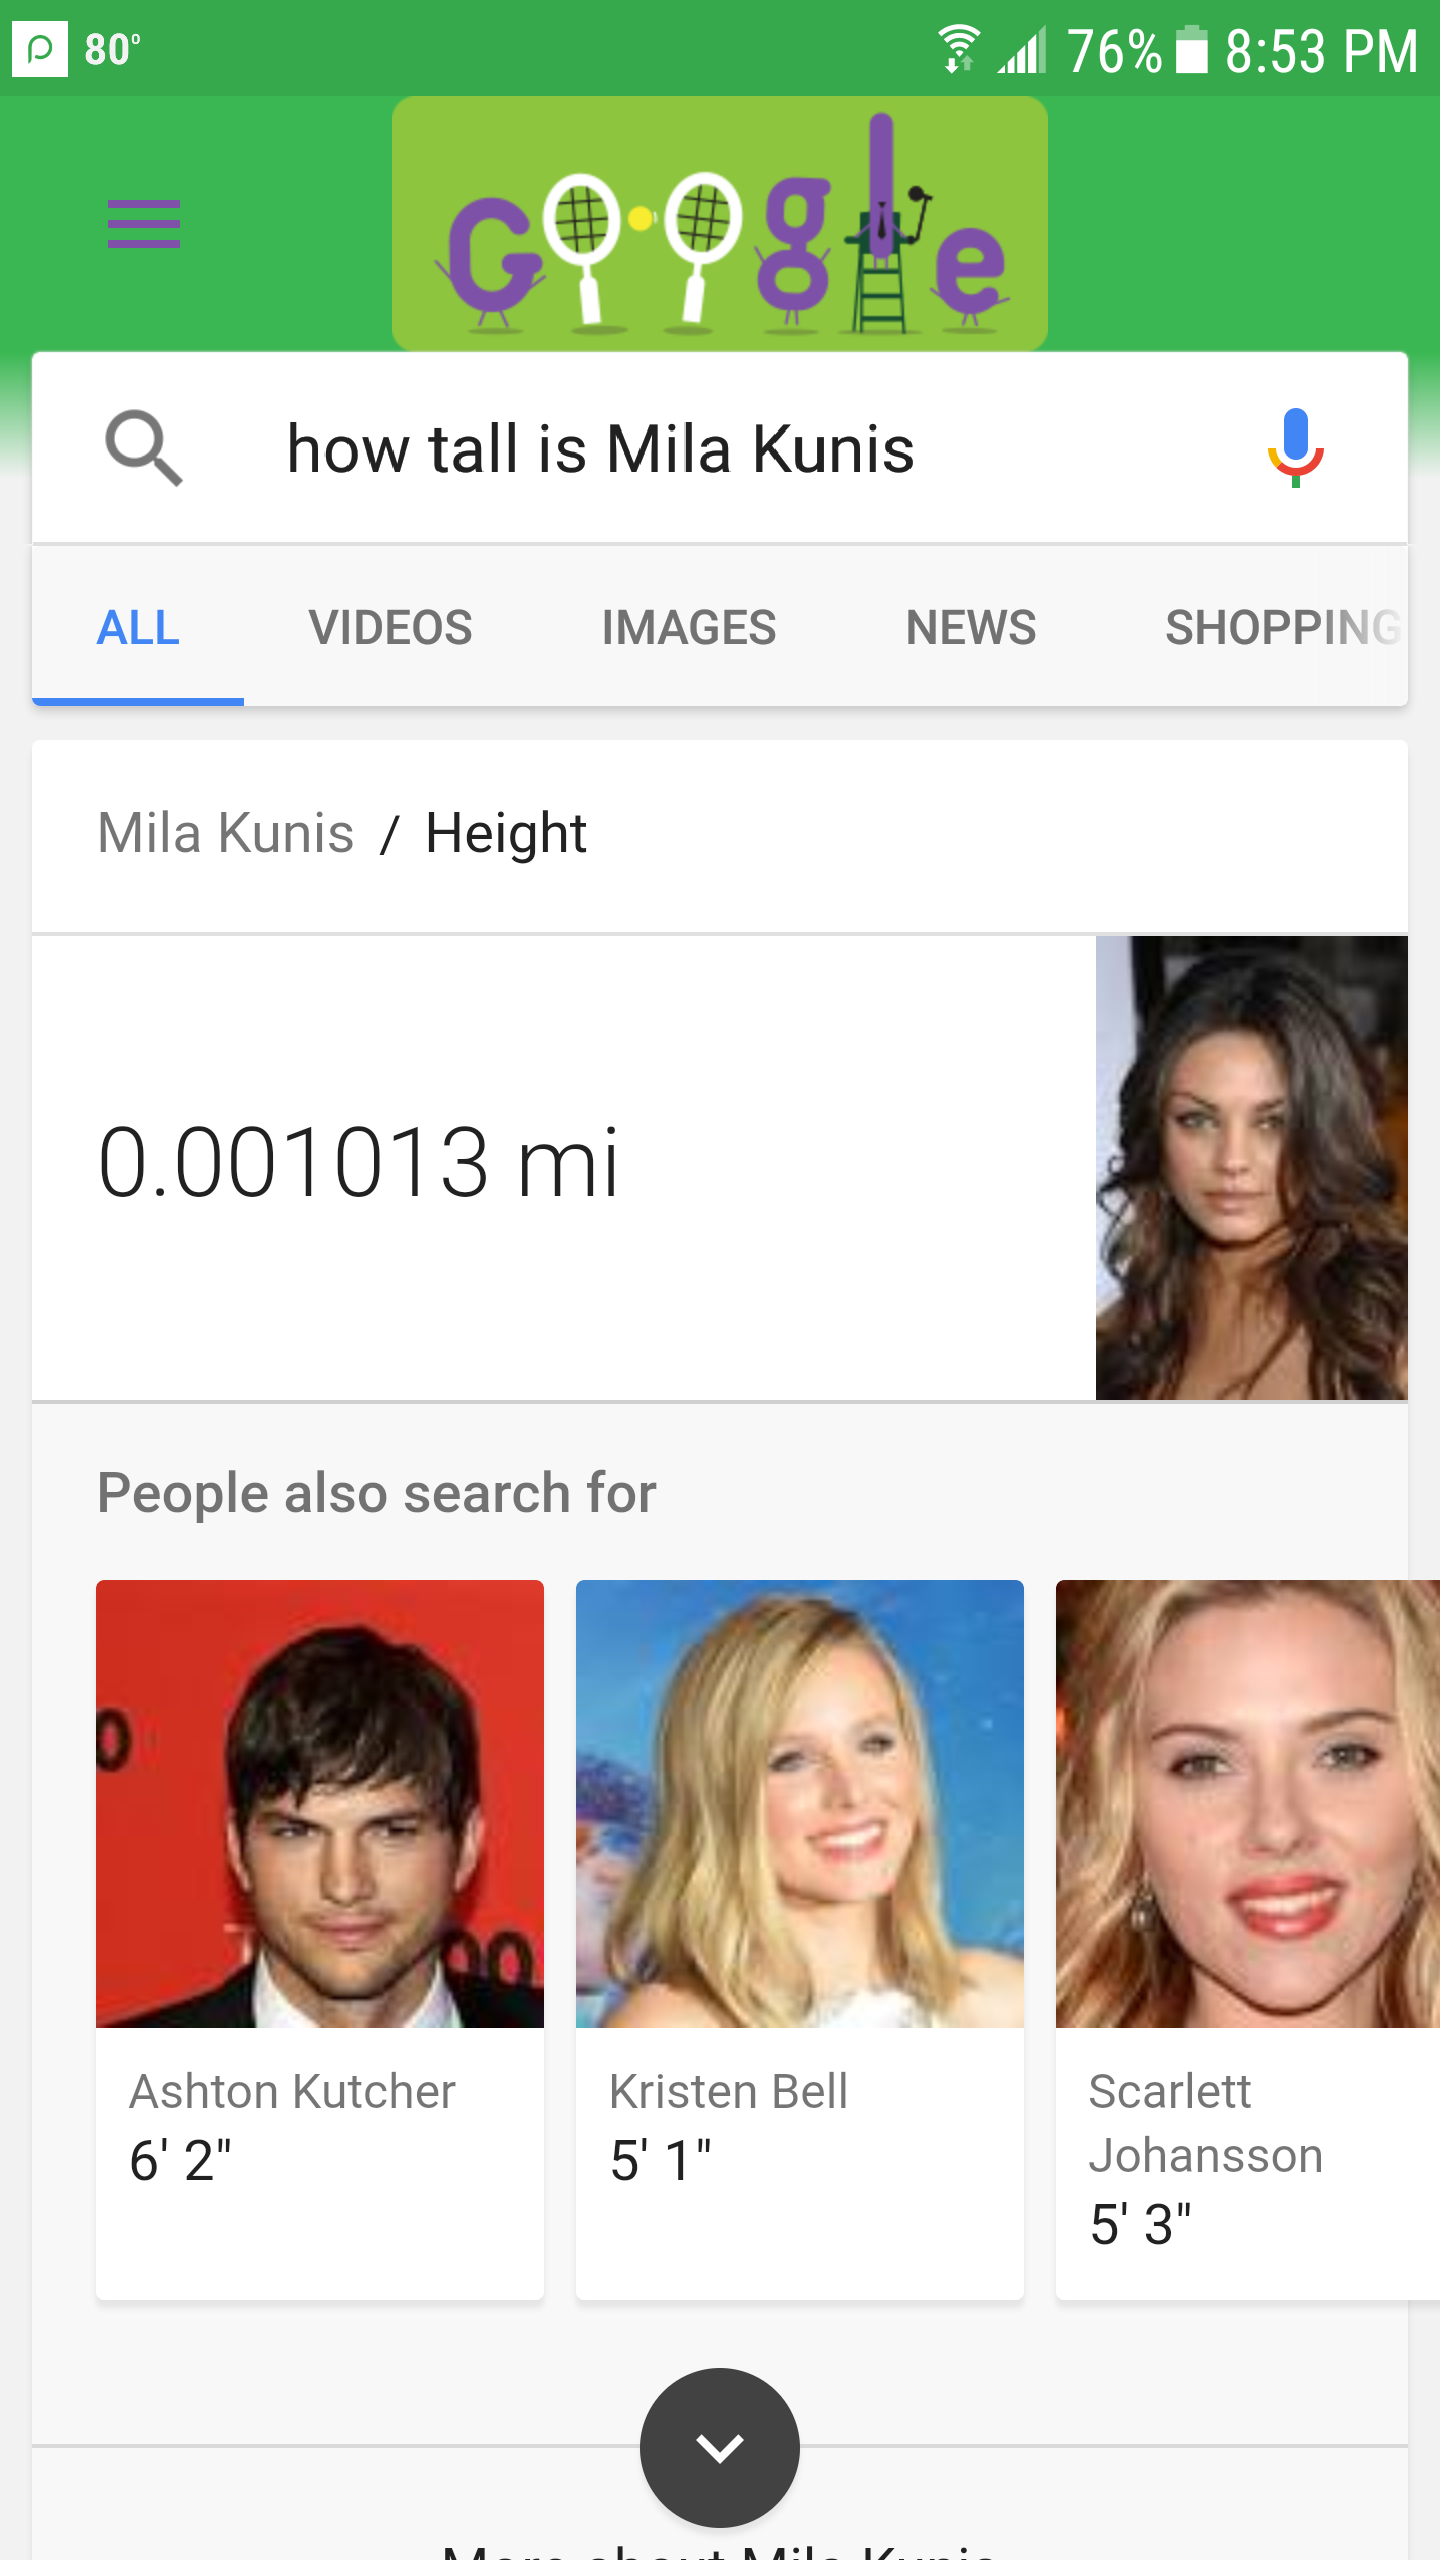 Googled how tall is Mila Kunis and it gave me the results in miles